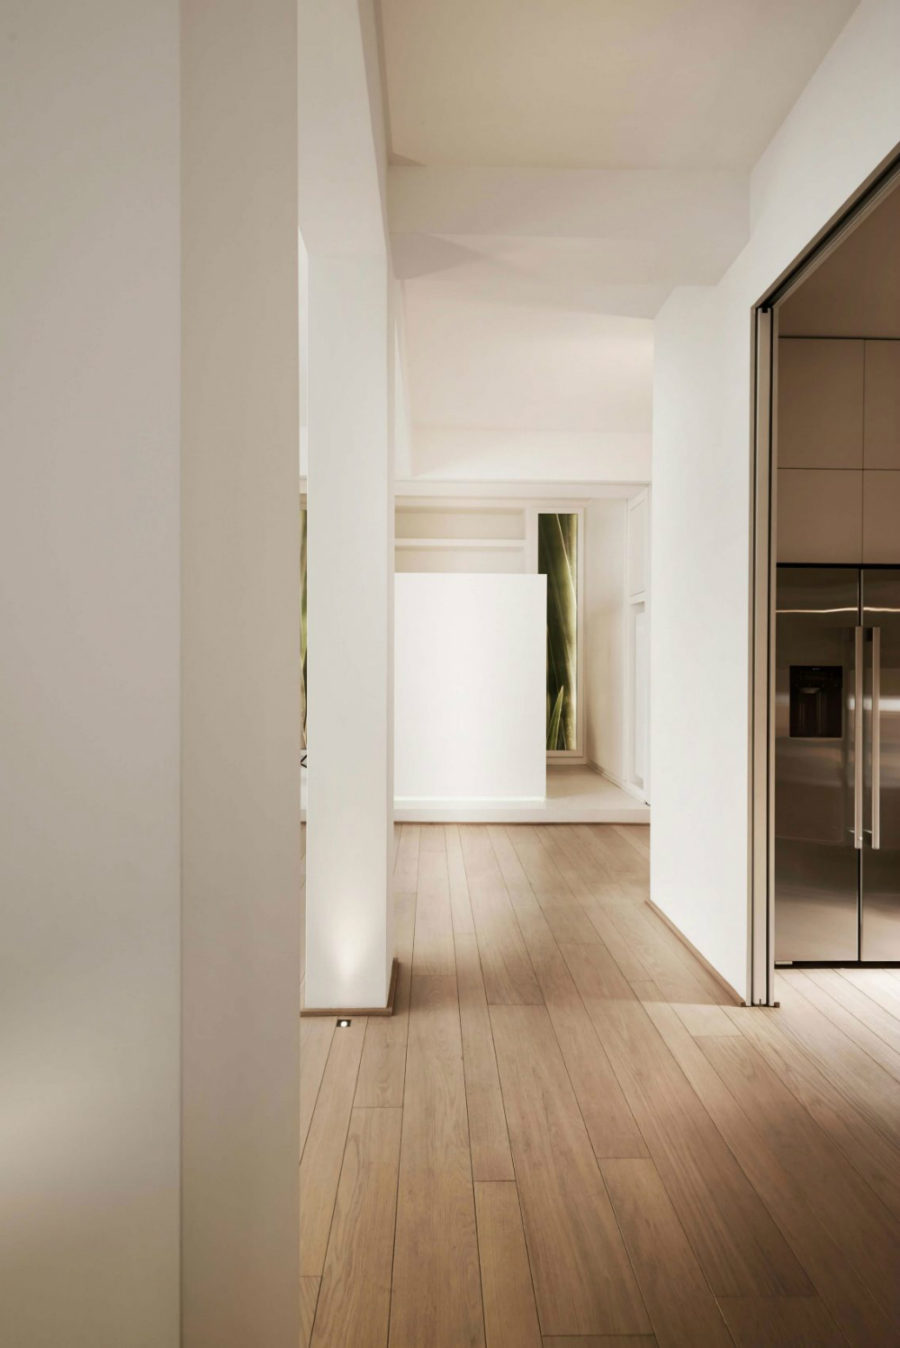 Light wooden floor planks come in different widths